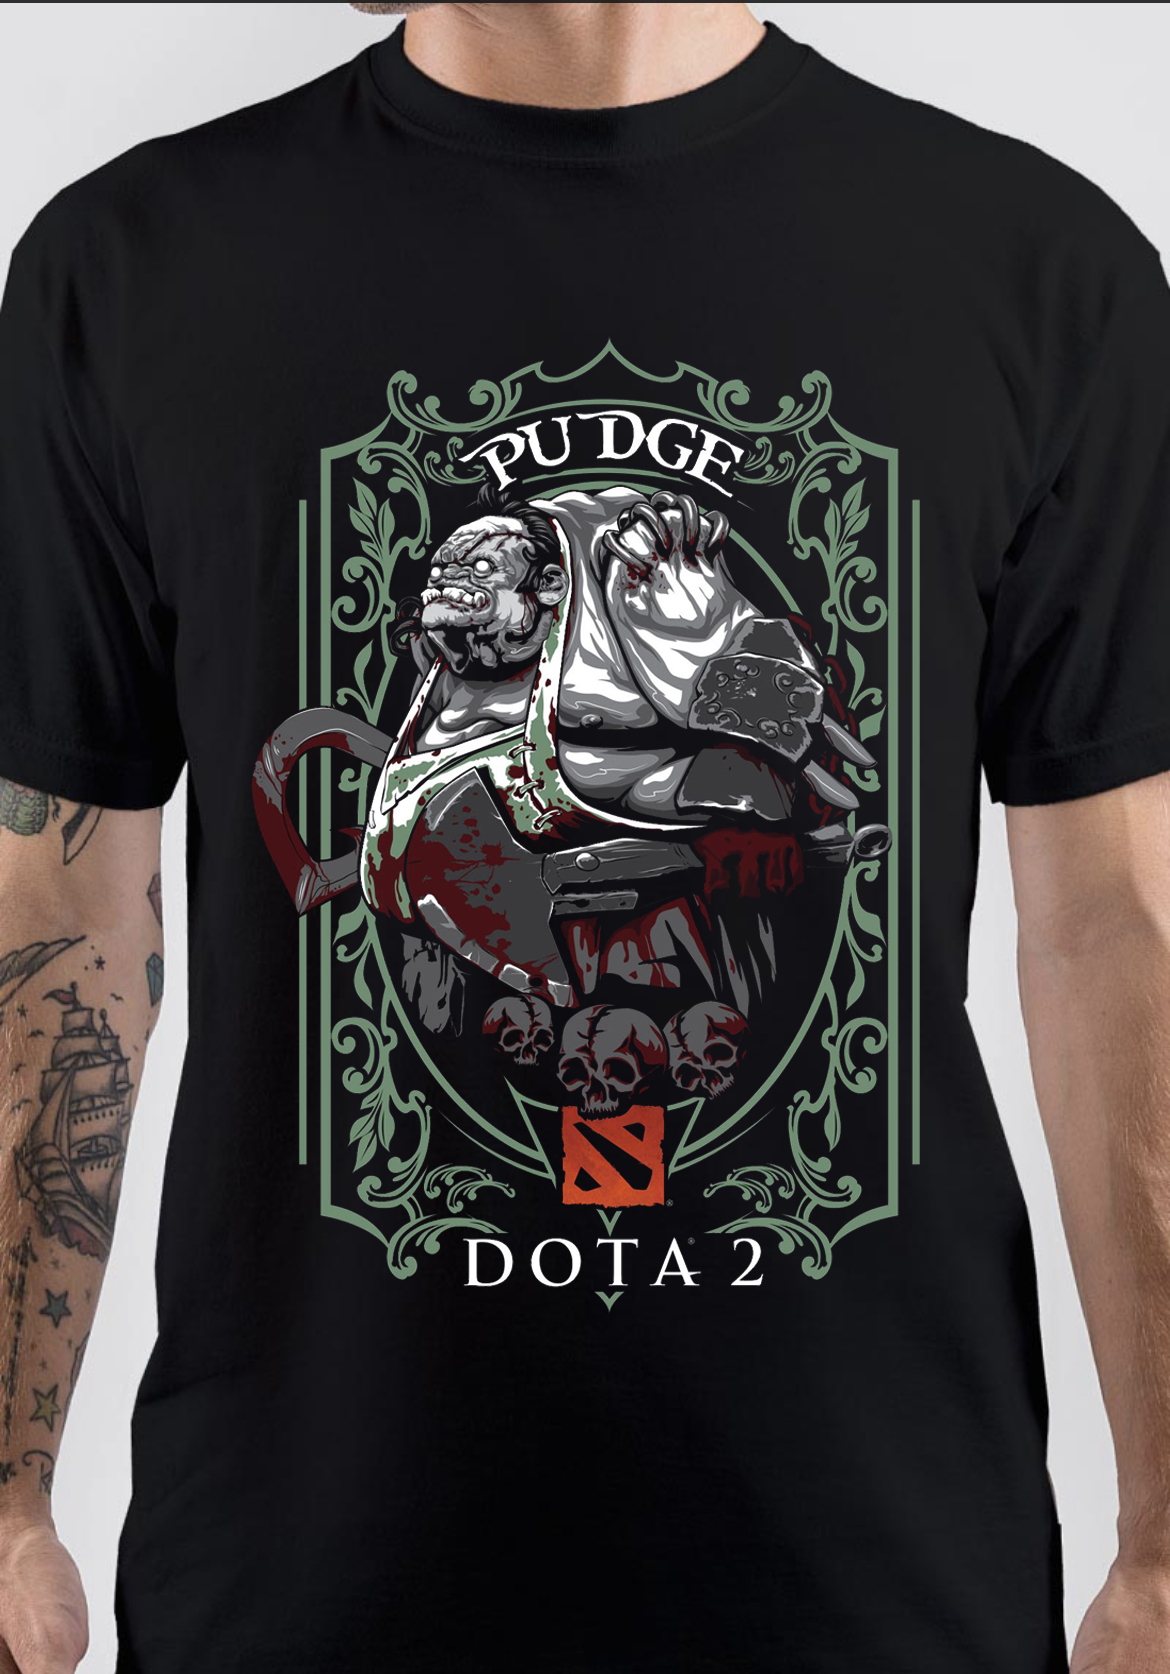 Pudge T-Shirt And Merchandise